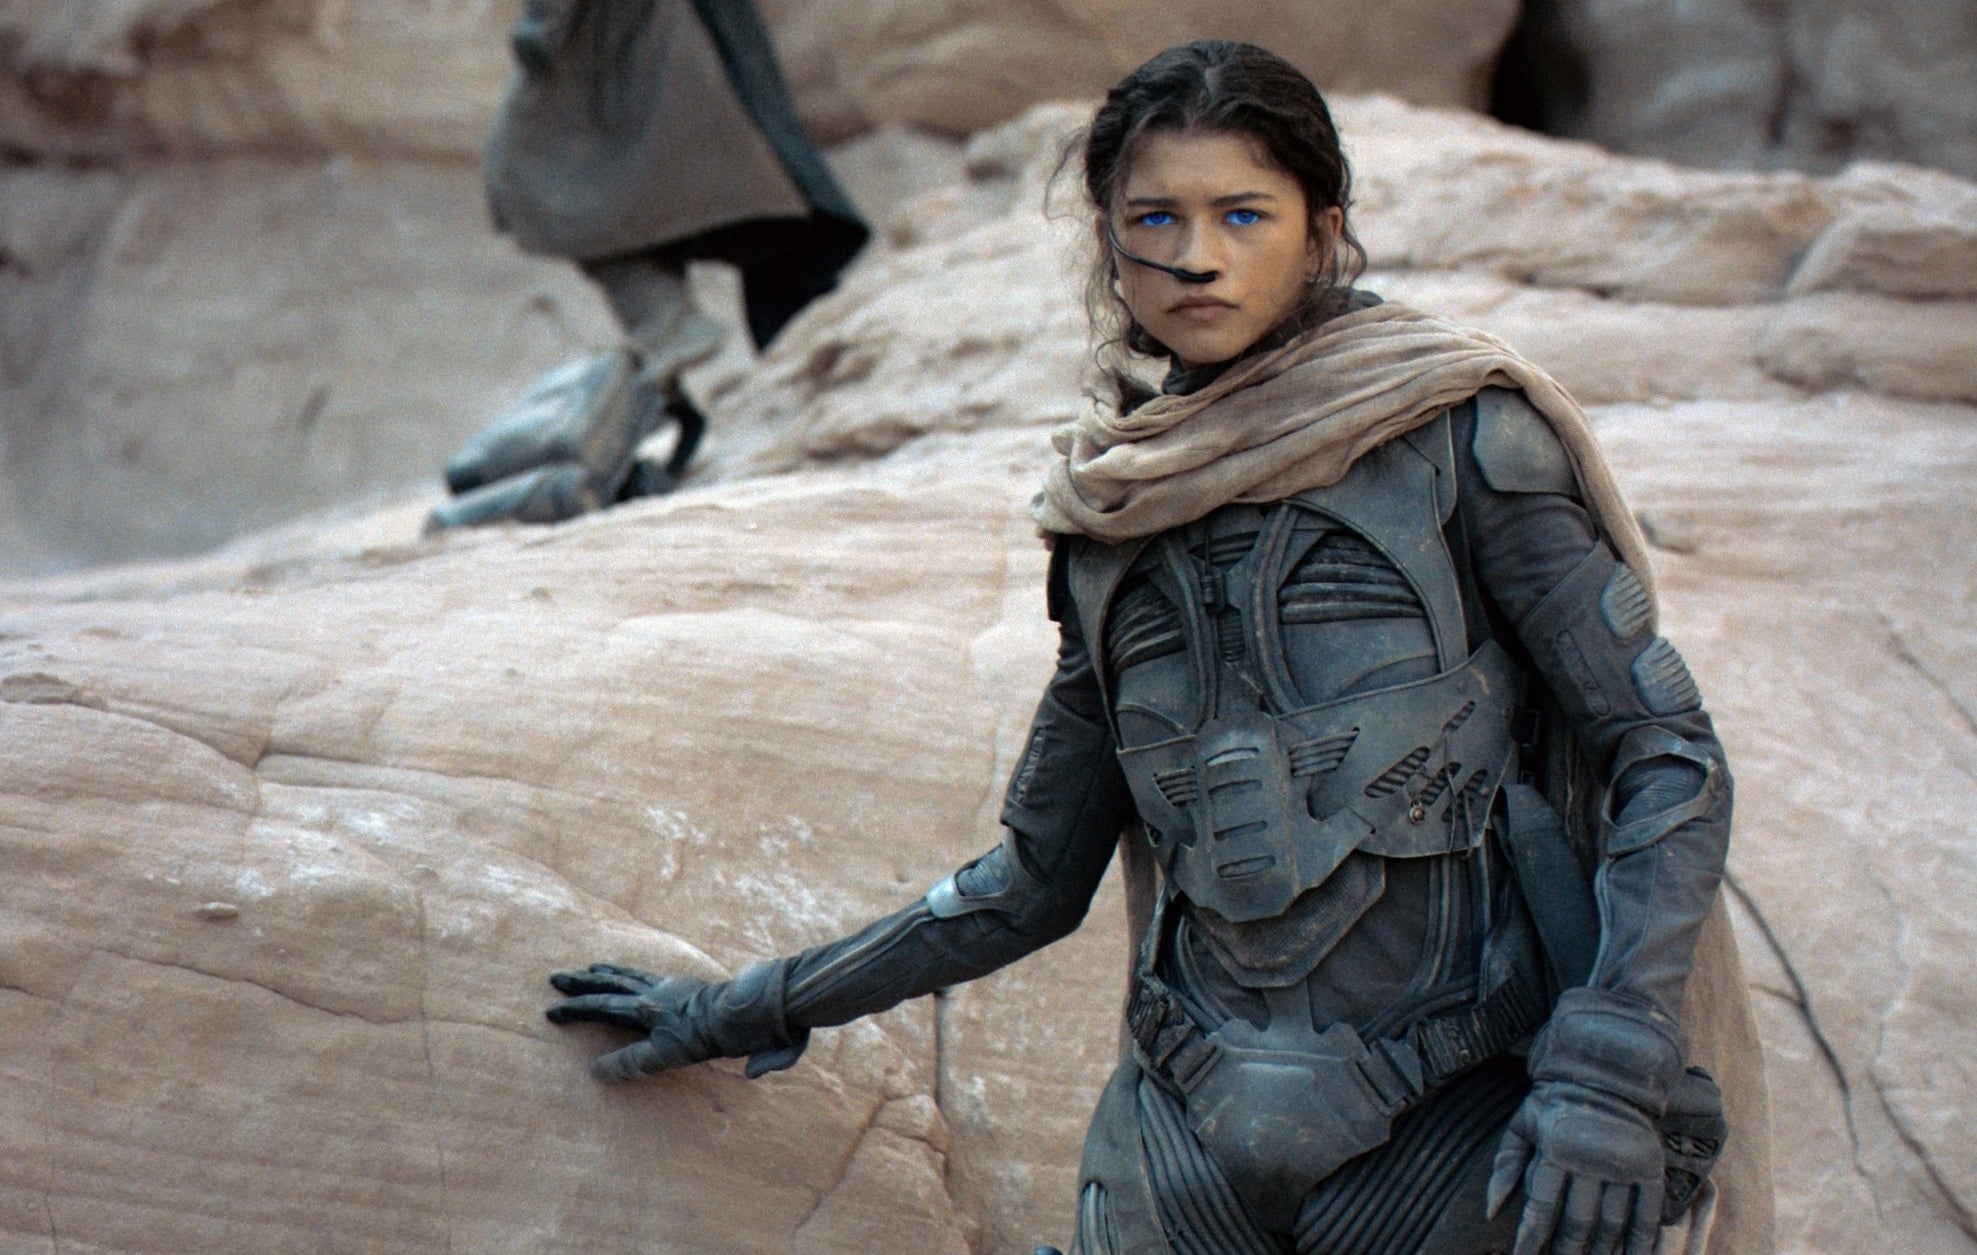 Zendaya in futuristic armor crouches on rocky terrain in a scene from a movie